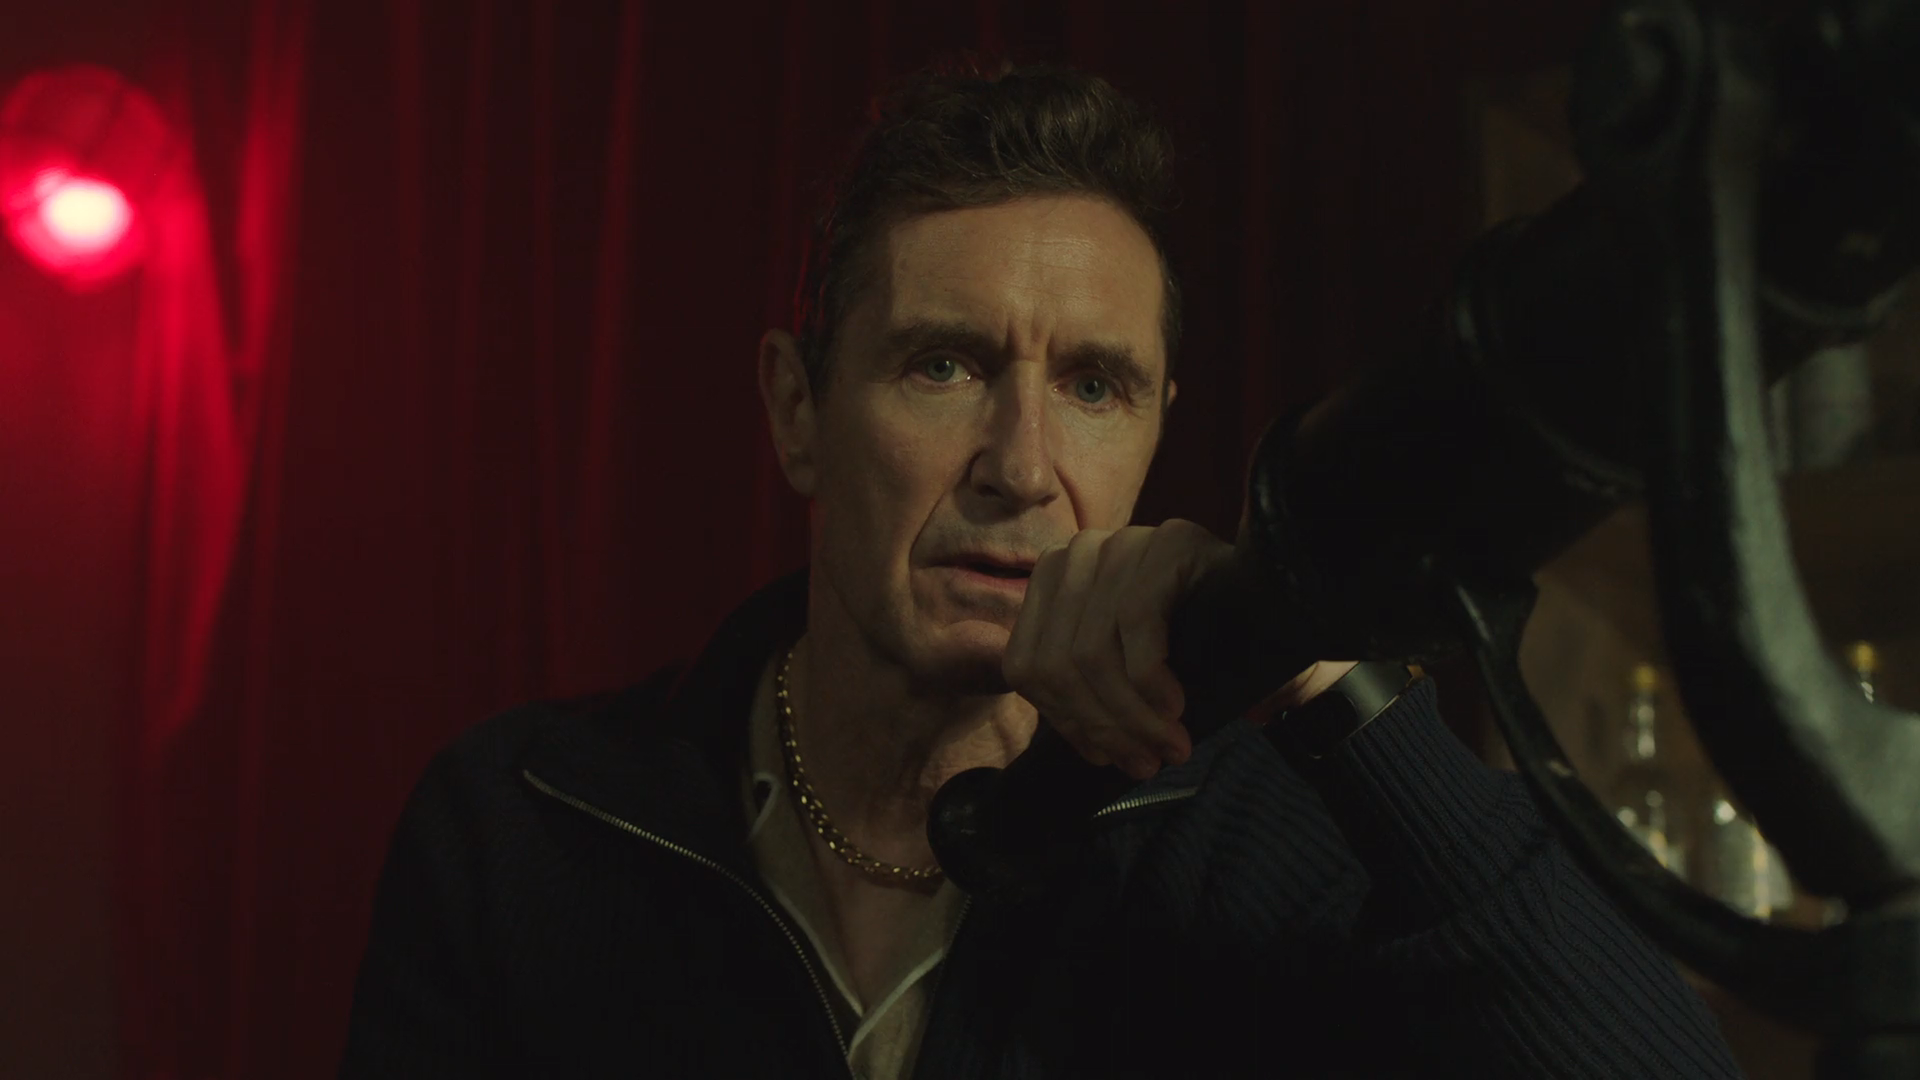 A screenshot of the villain (played by Paul McGann) in Mia and the Dragon Princess.